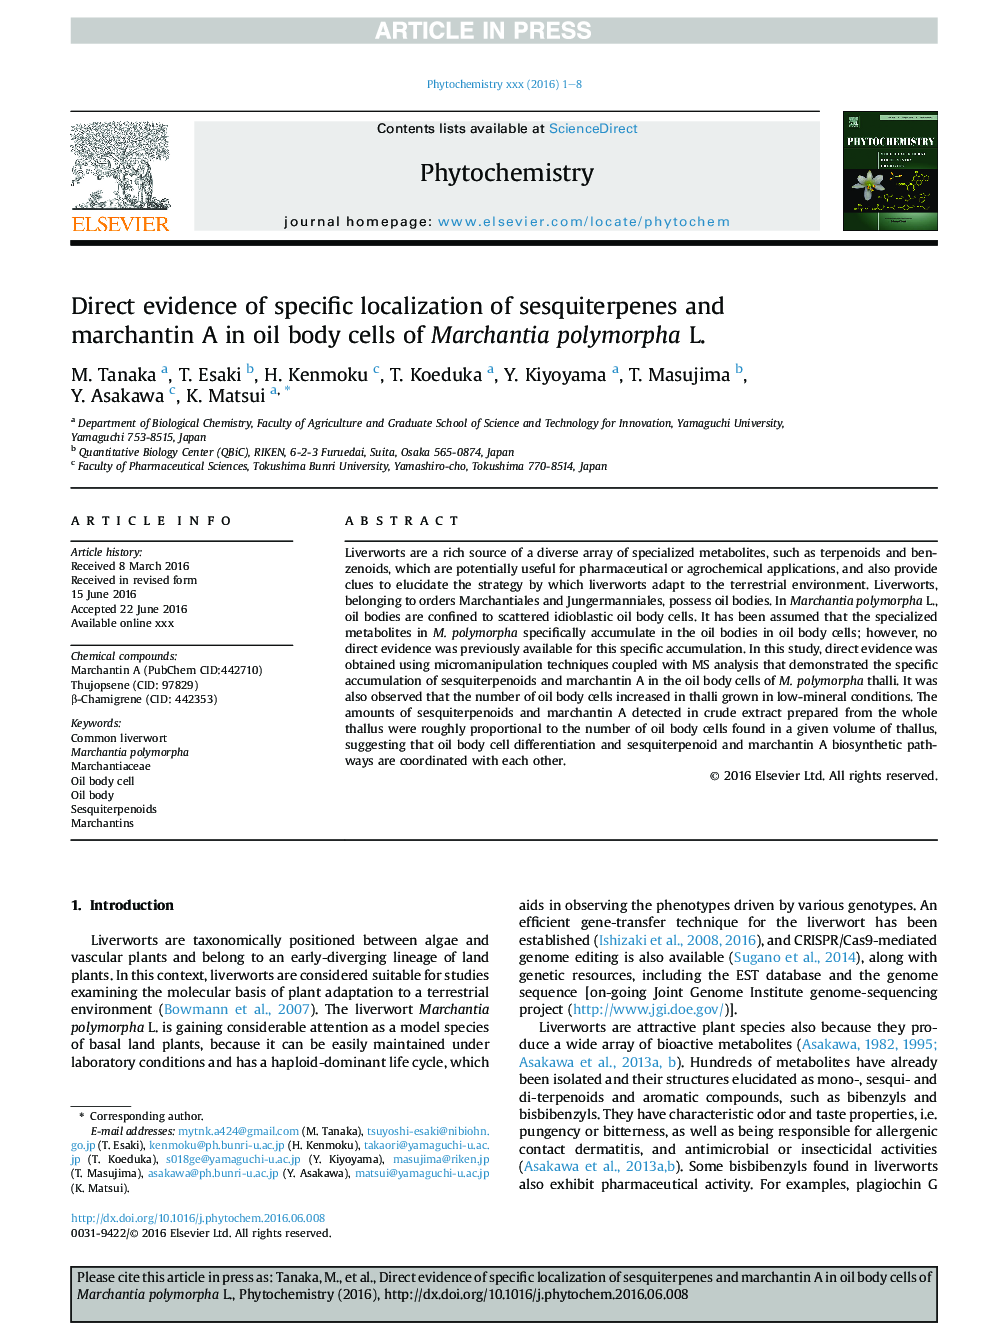 Direct evidence of specific localization of sesquiterpenes and marchantin A in oil body cells of Marchantia polymorpha L.